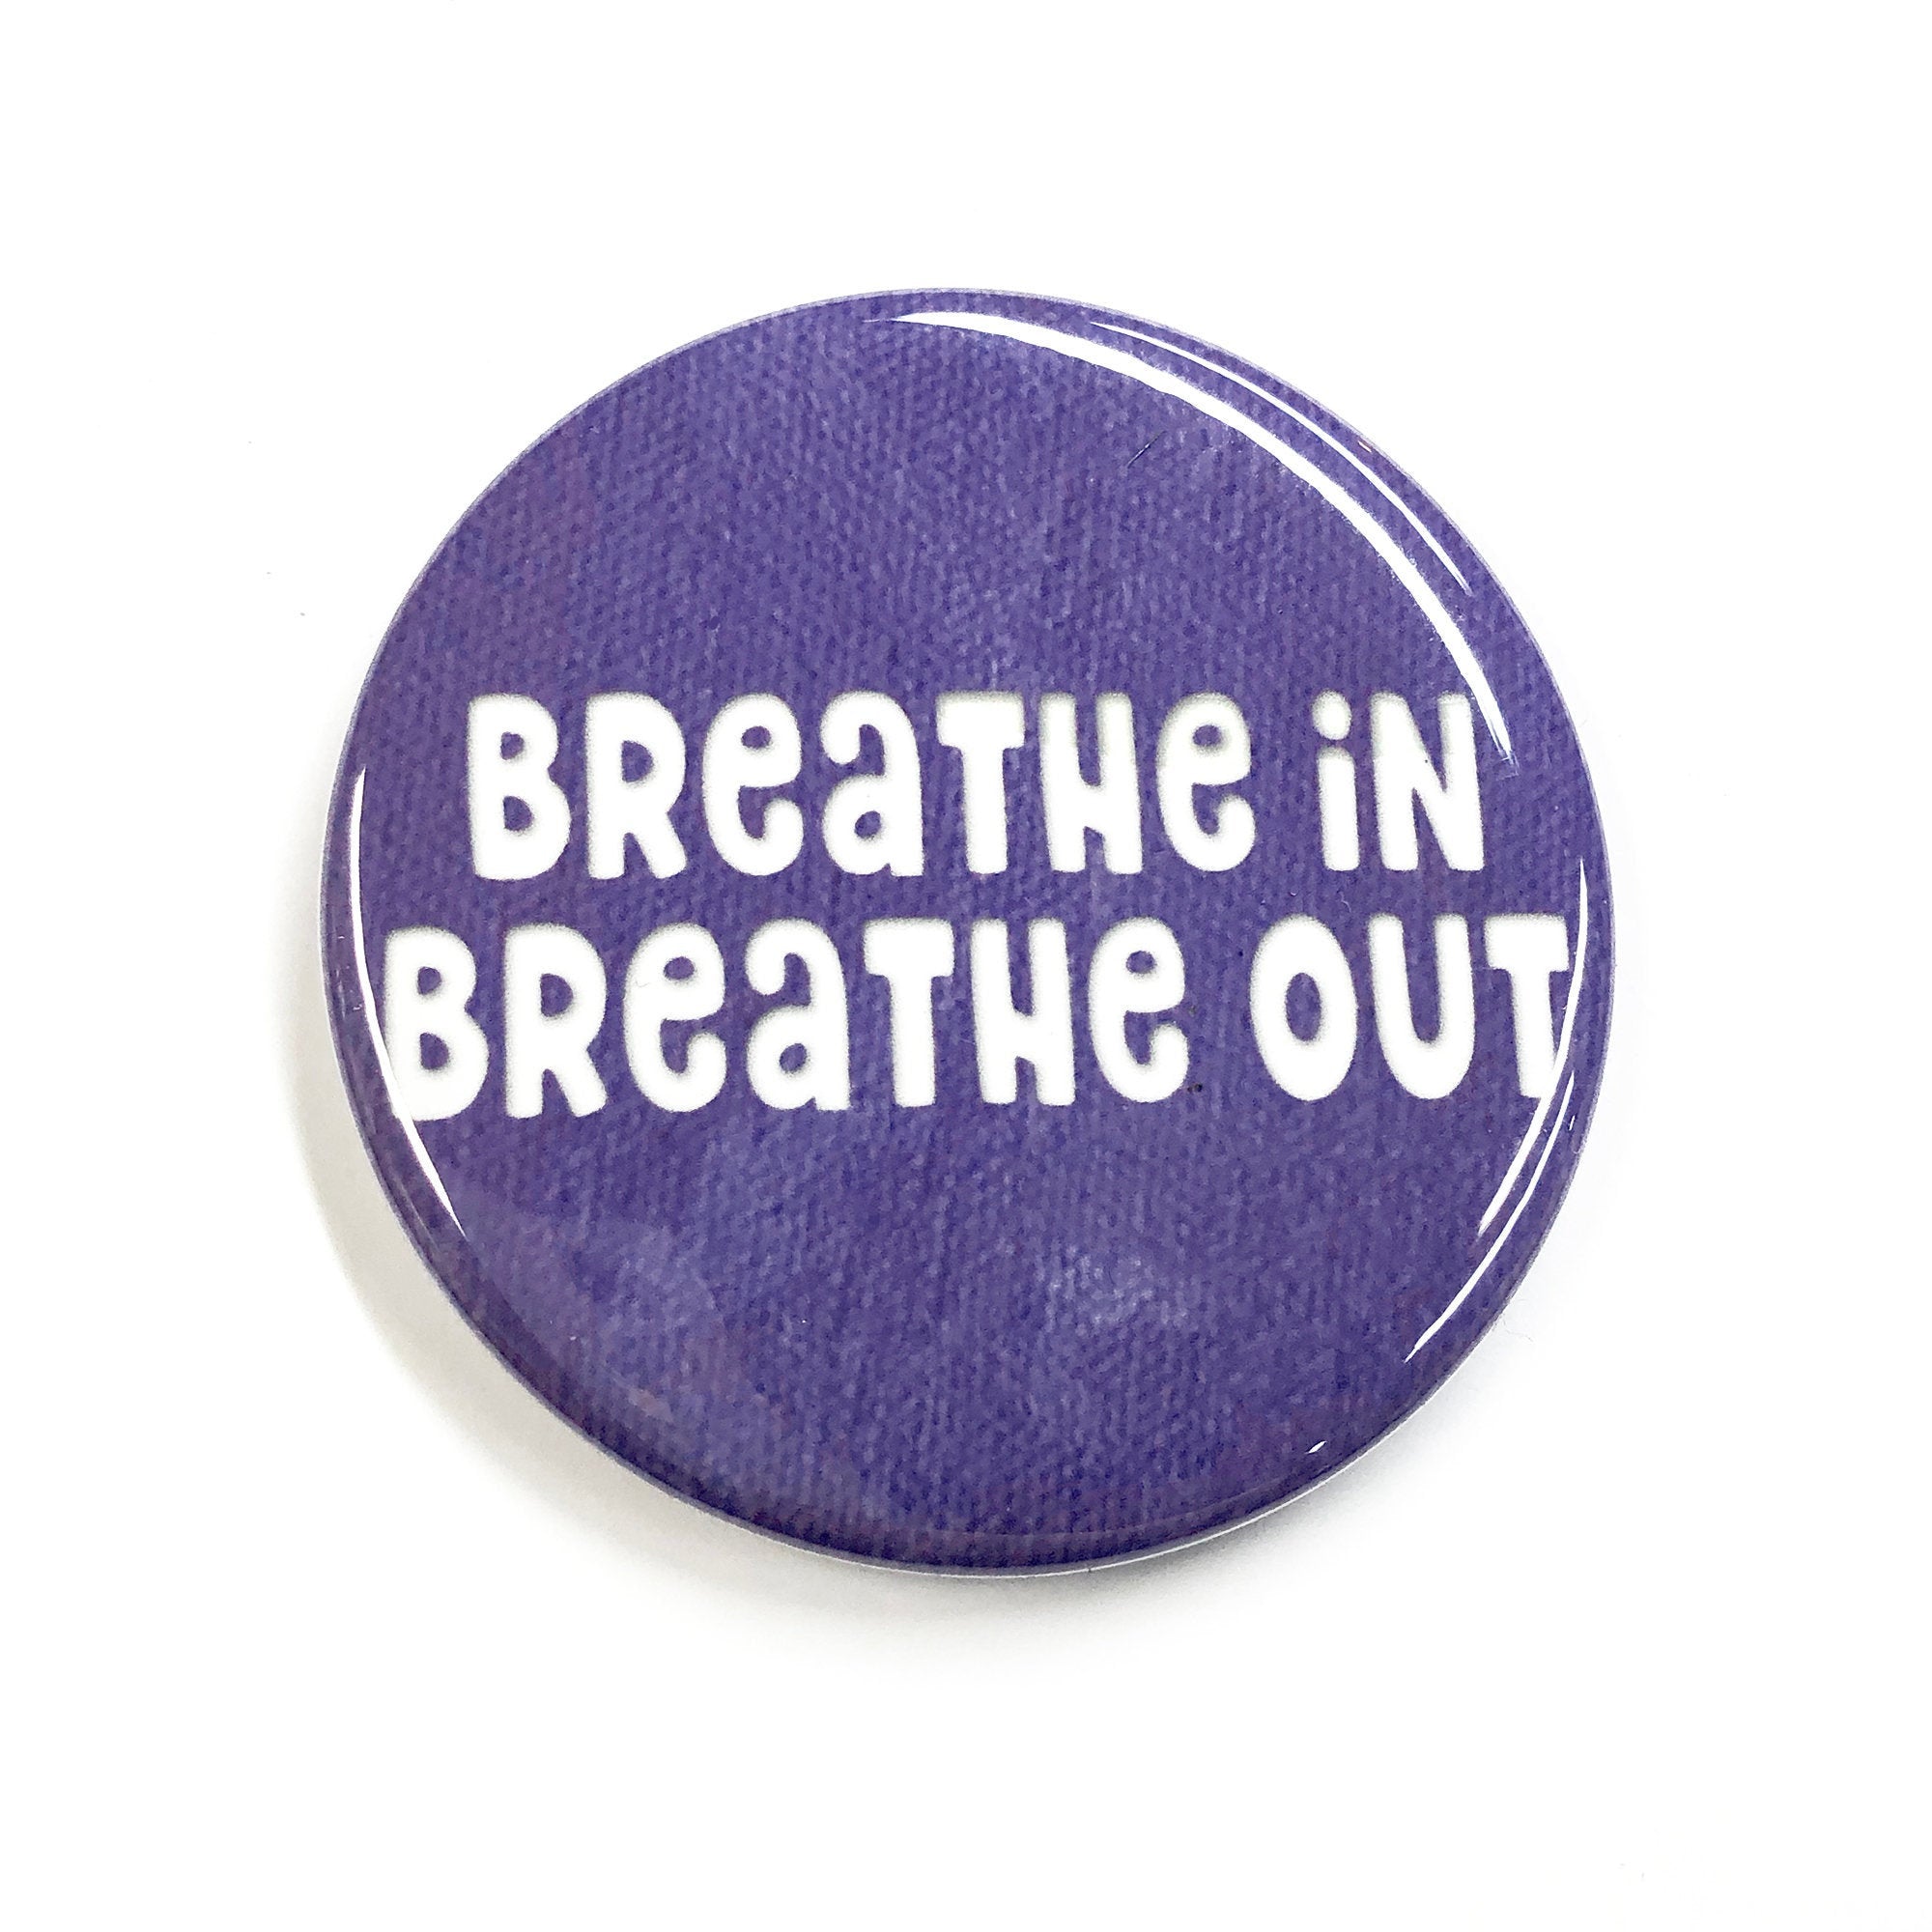 Breathe In Breathe Out Magnet, Pin Back Button or Pocket Mirror